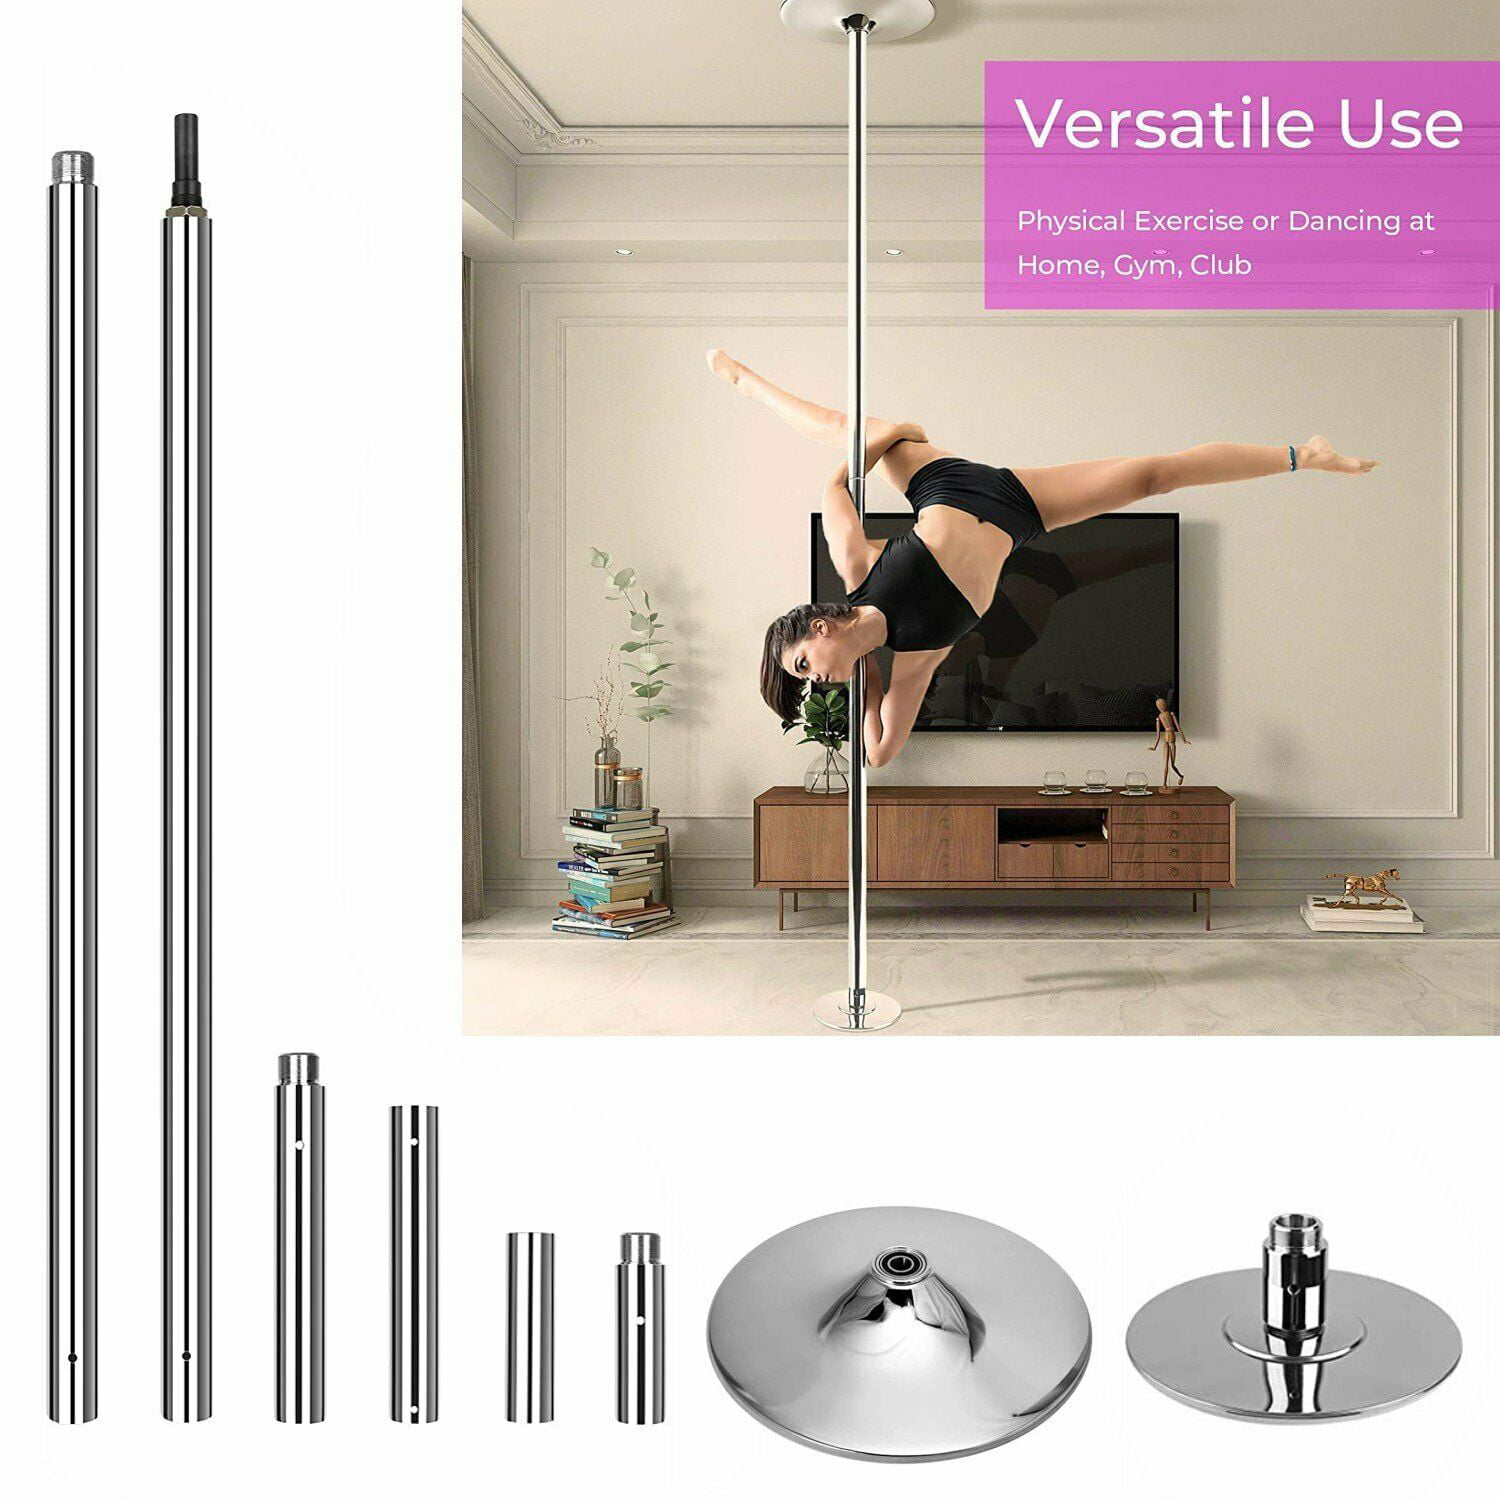 45mm Dance Pole Kit Portable Static Spinning Fitness Exercise with 2 Extensions 